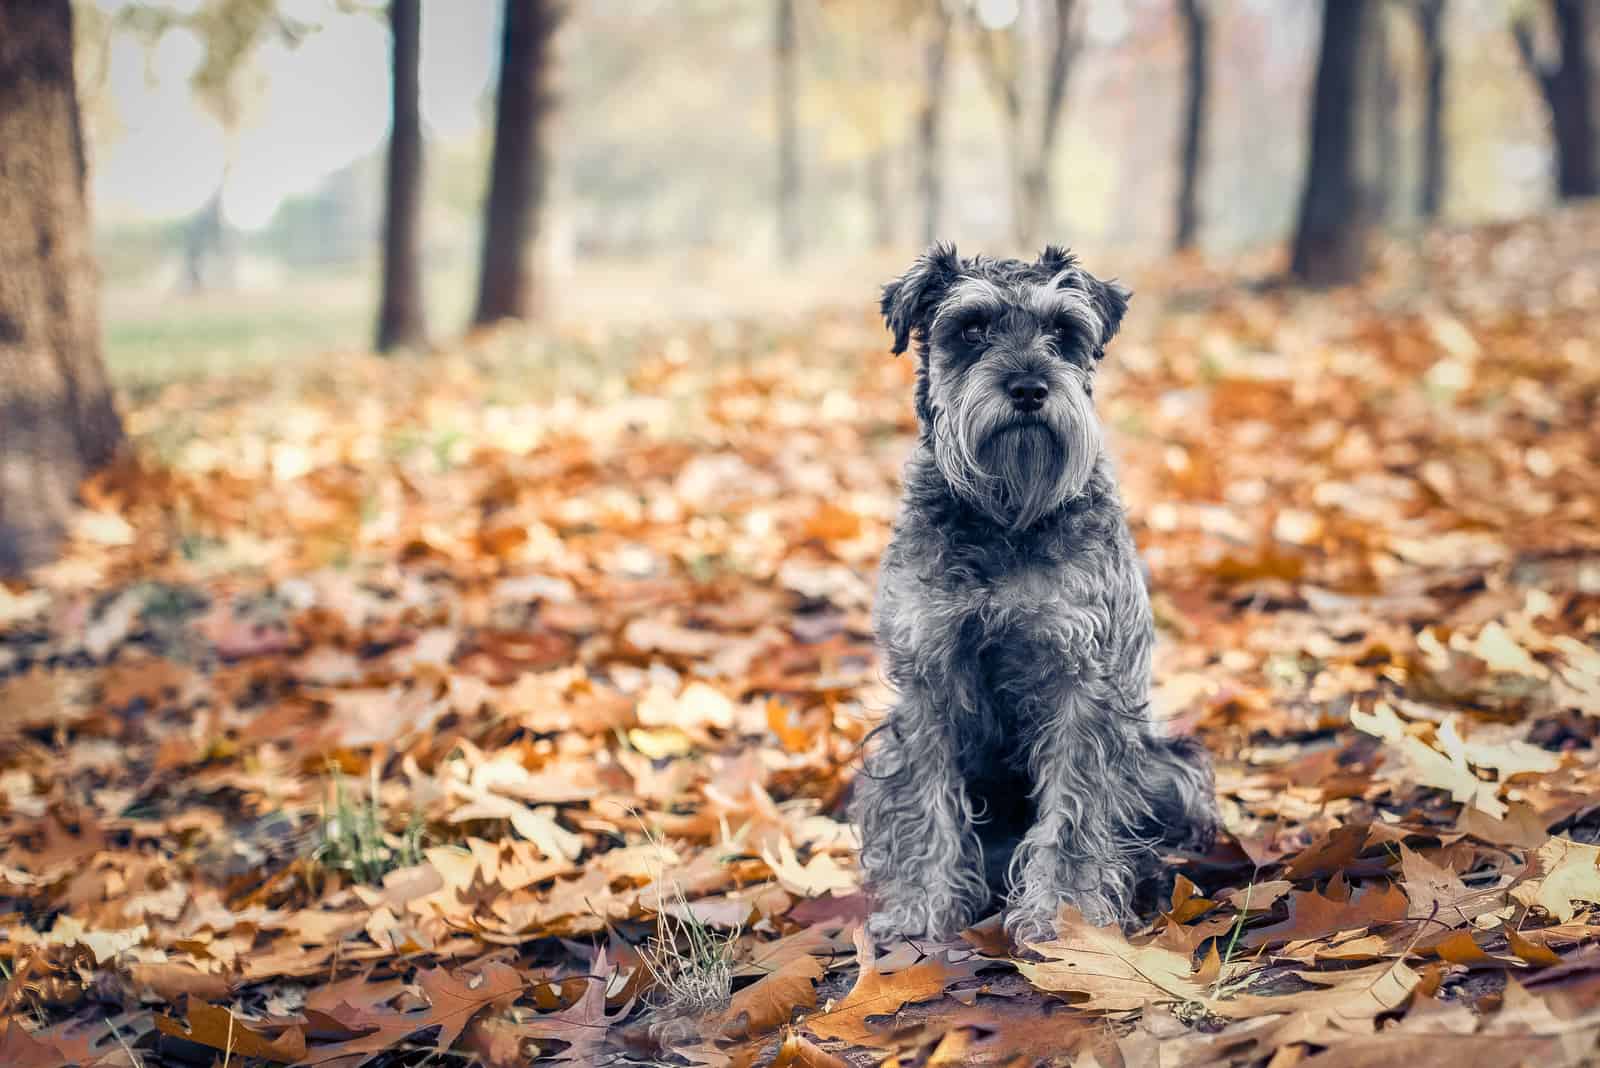 Are Schnauzers Hypoallergenic? Dog Shedding And Allergies